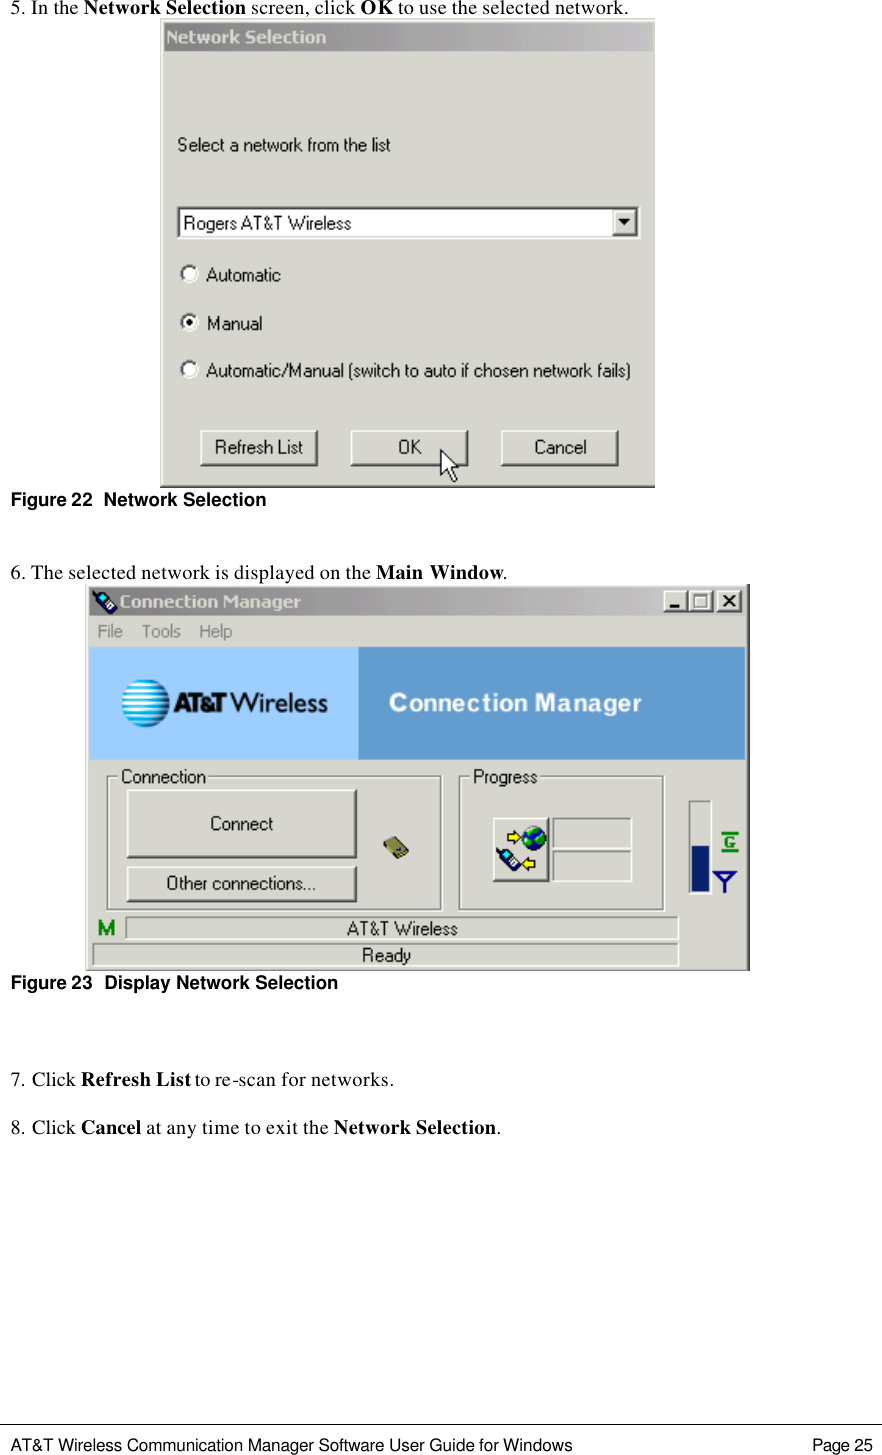   AT&amp;T Wireless Communication Manager Software User Guide for Windows    Page 25  5. In the Network Selection screen, click OK to use the selected network.      Figure 22  Network Selection  6. The selected network is displayed on the Main Window.    Figure 23  Display Network Selection       7. Click Refresh List to re-scan for networks.  8. Click Cancel at any time to exit the Network Selection.      